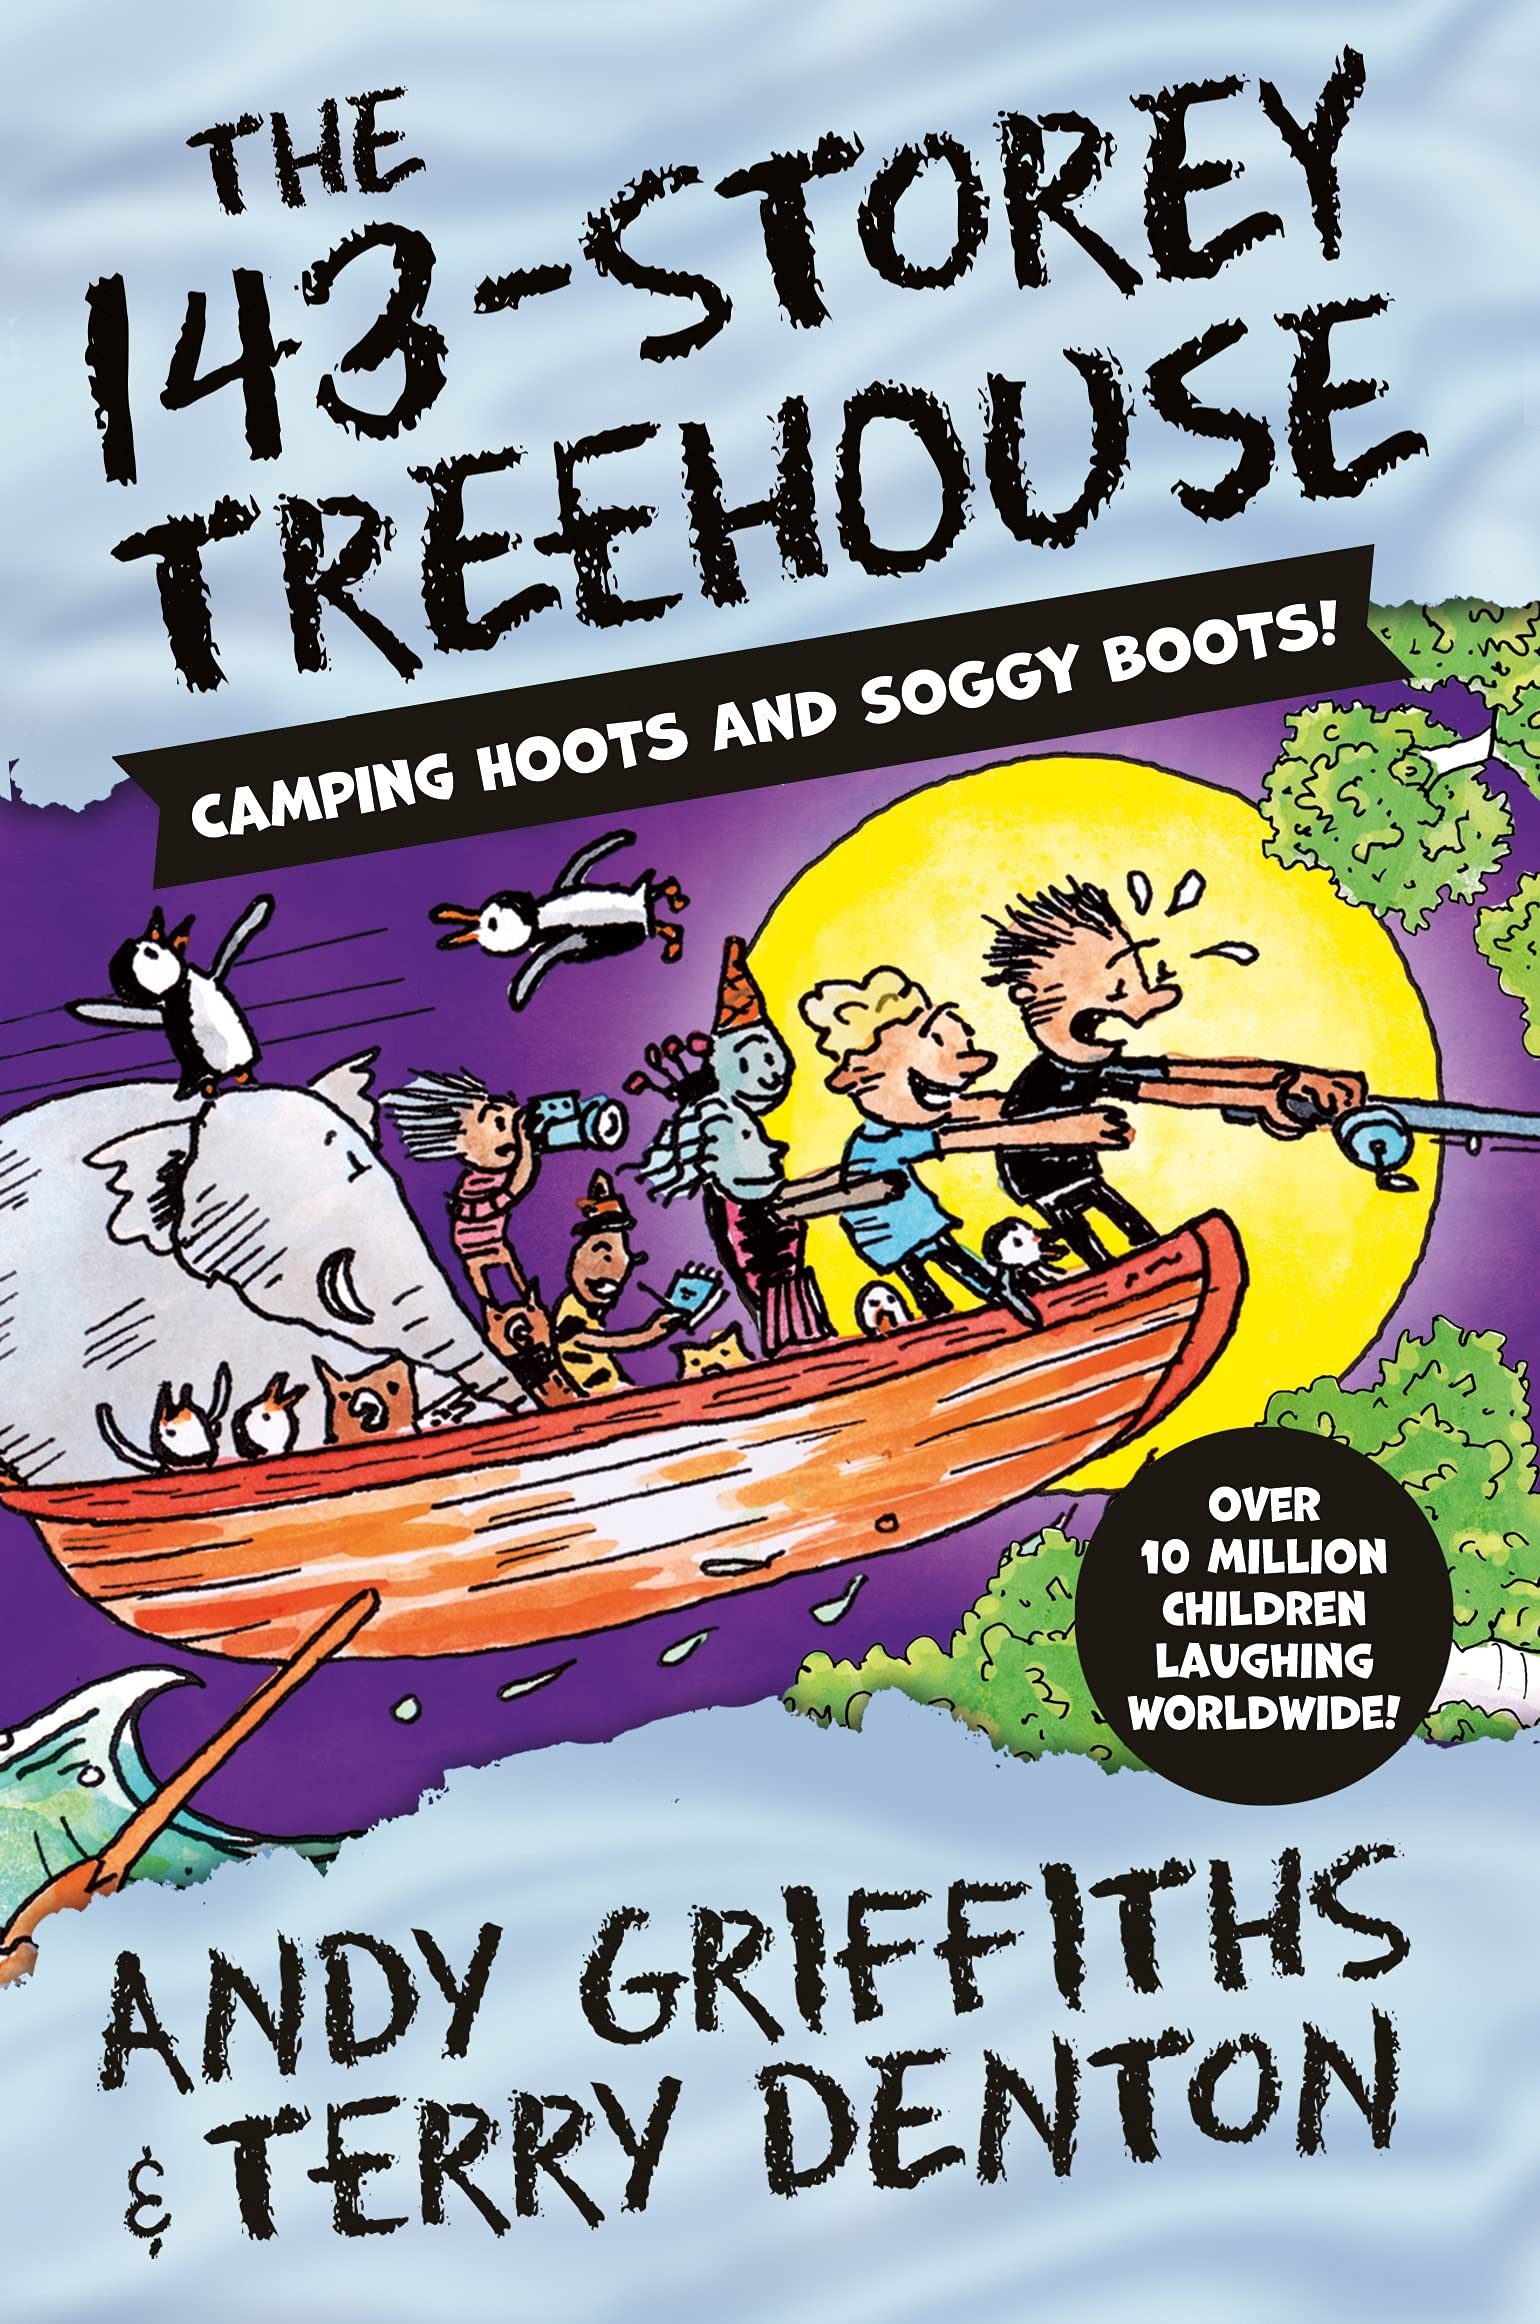 The 143-Storey Treehouse: Camping Hoots and Soggy Boots!